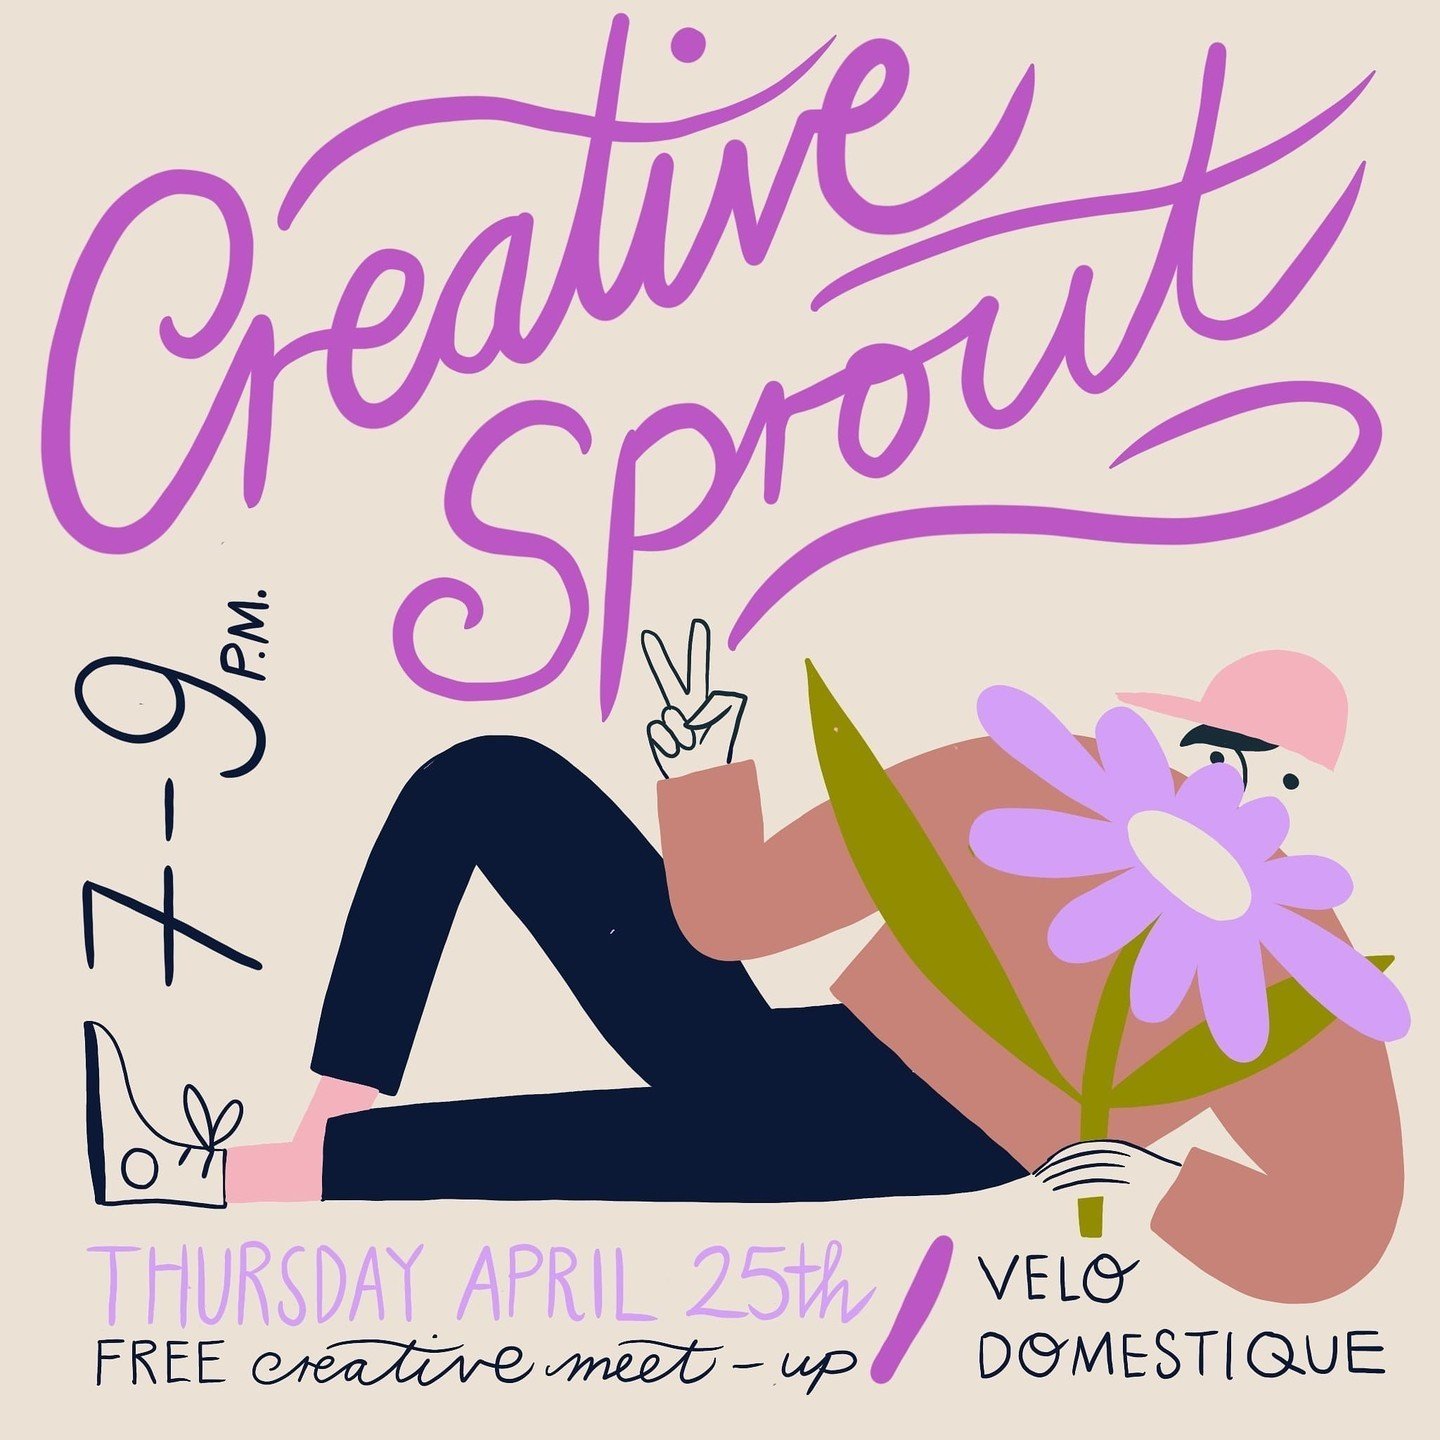 Step into the vibrant world of creativity at the much-anticipated Creative Sprout event, an evening designed for forging connections and igniting inspiration 🌟⁠
⁠
Hosted by local illustrator @karolinschnoor, Creative Sprout is all about genuine conv